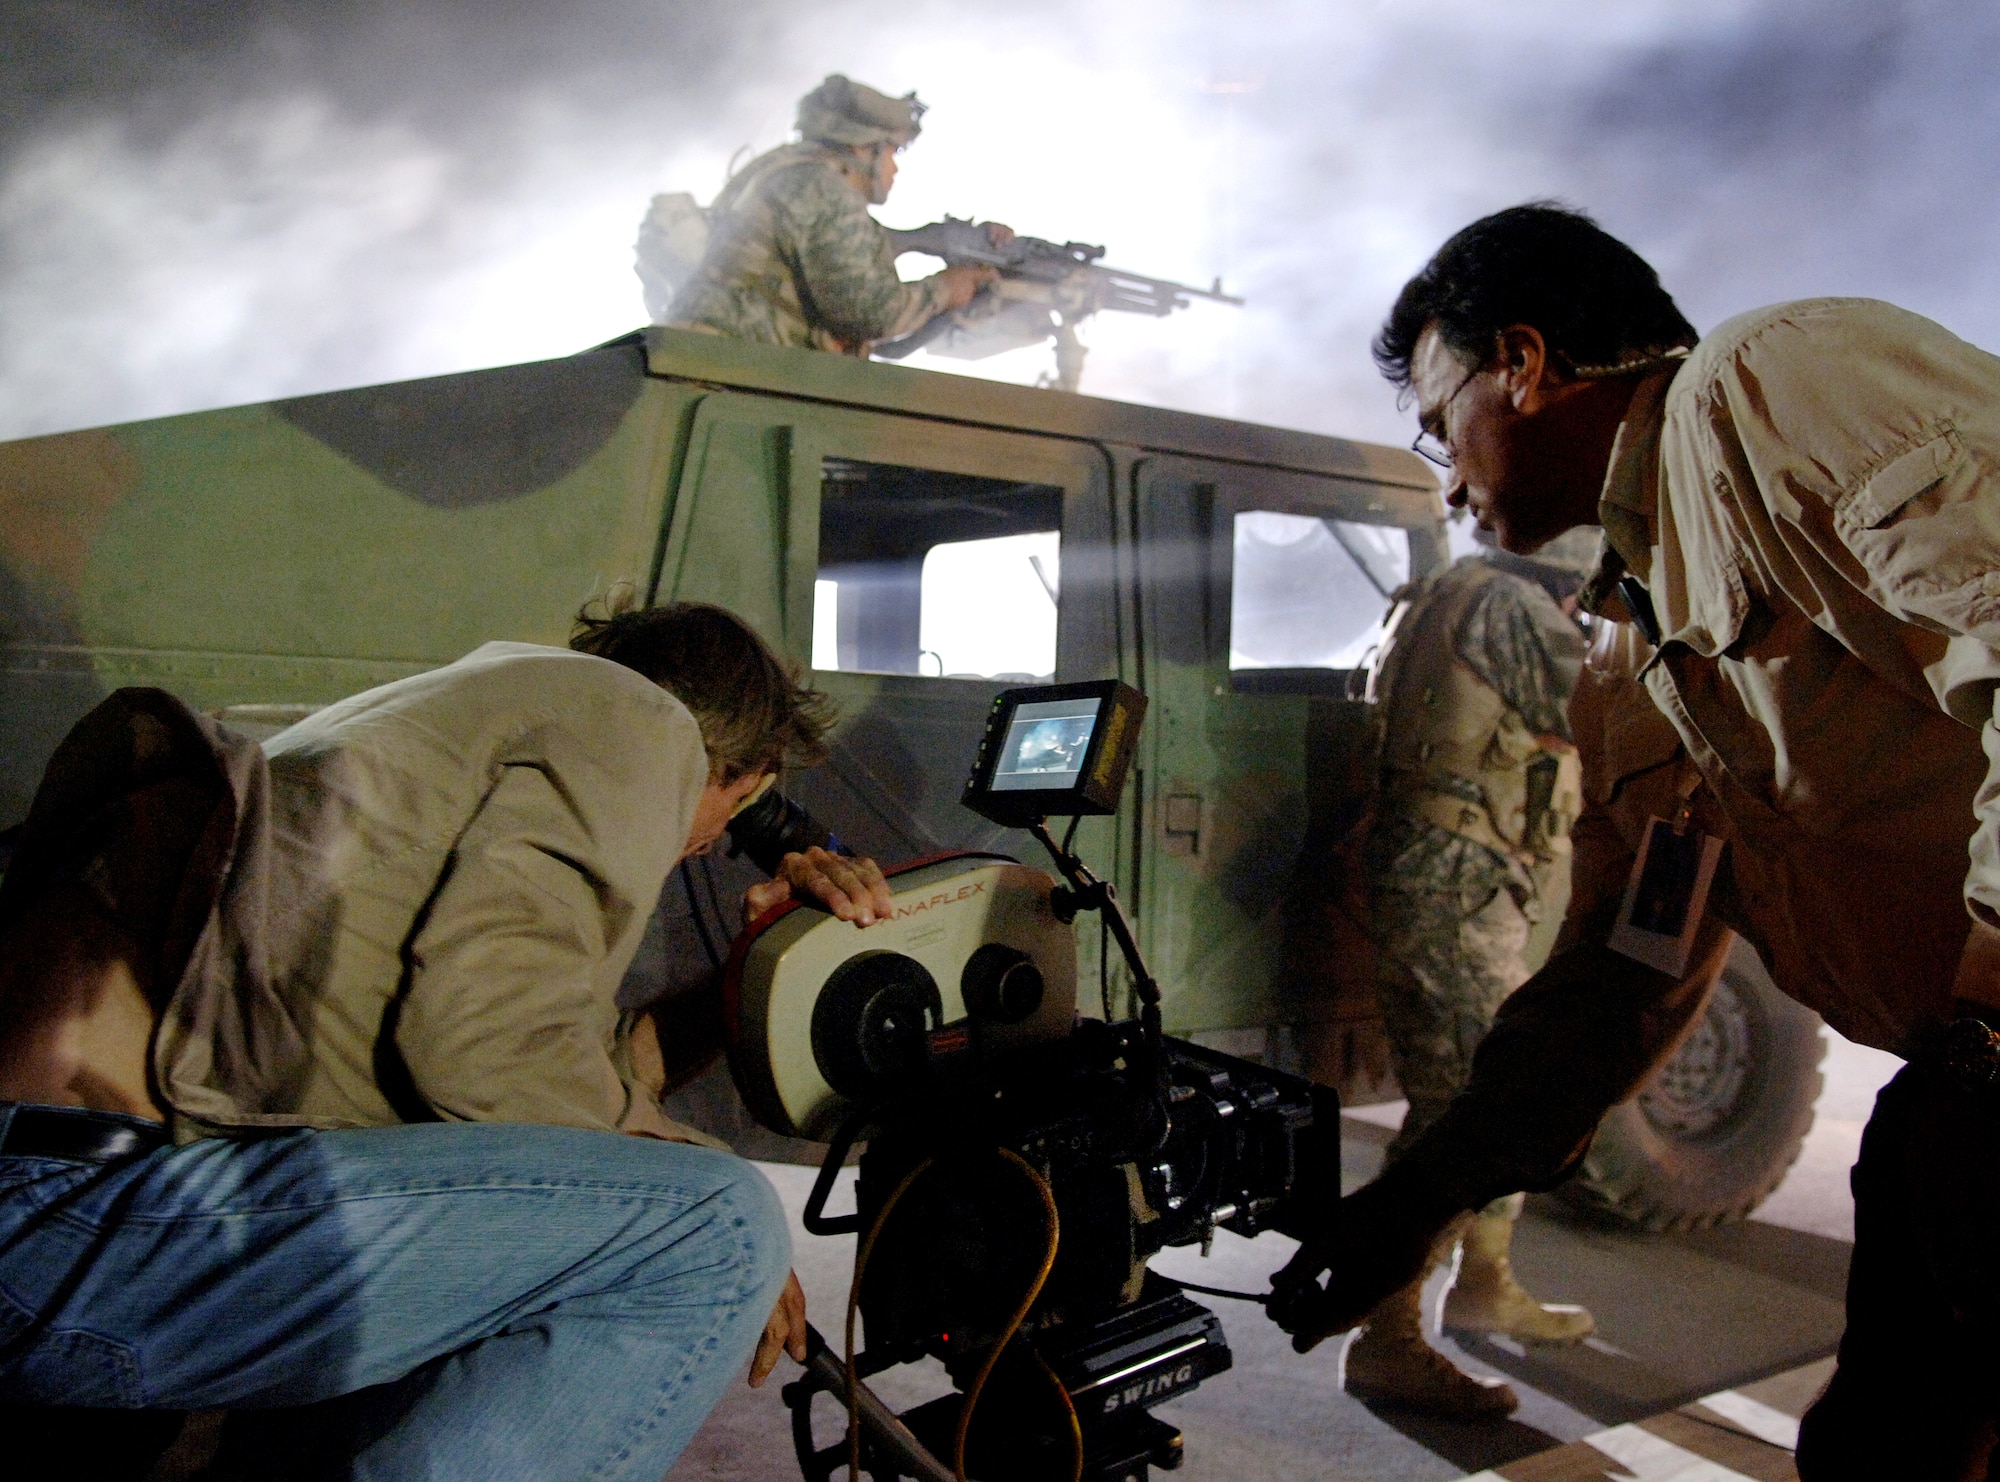 Movie director Michael Bay films an Airman on the set of the movie "Transformers" at Holloman Air Force Base, N.M., on May 31. Several Airmen had the opportunity to fill roles as extras during filming. The movie is scheduled for release in July 2007. (U.S. Air Force photo/Tech. Sgt. Larry A. Simmons)
